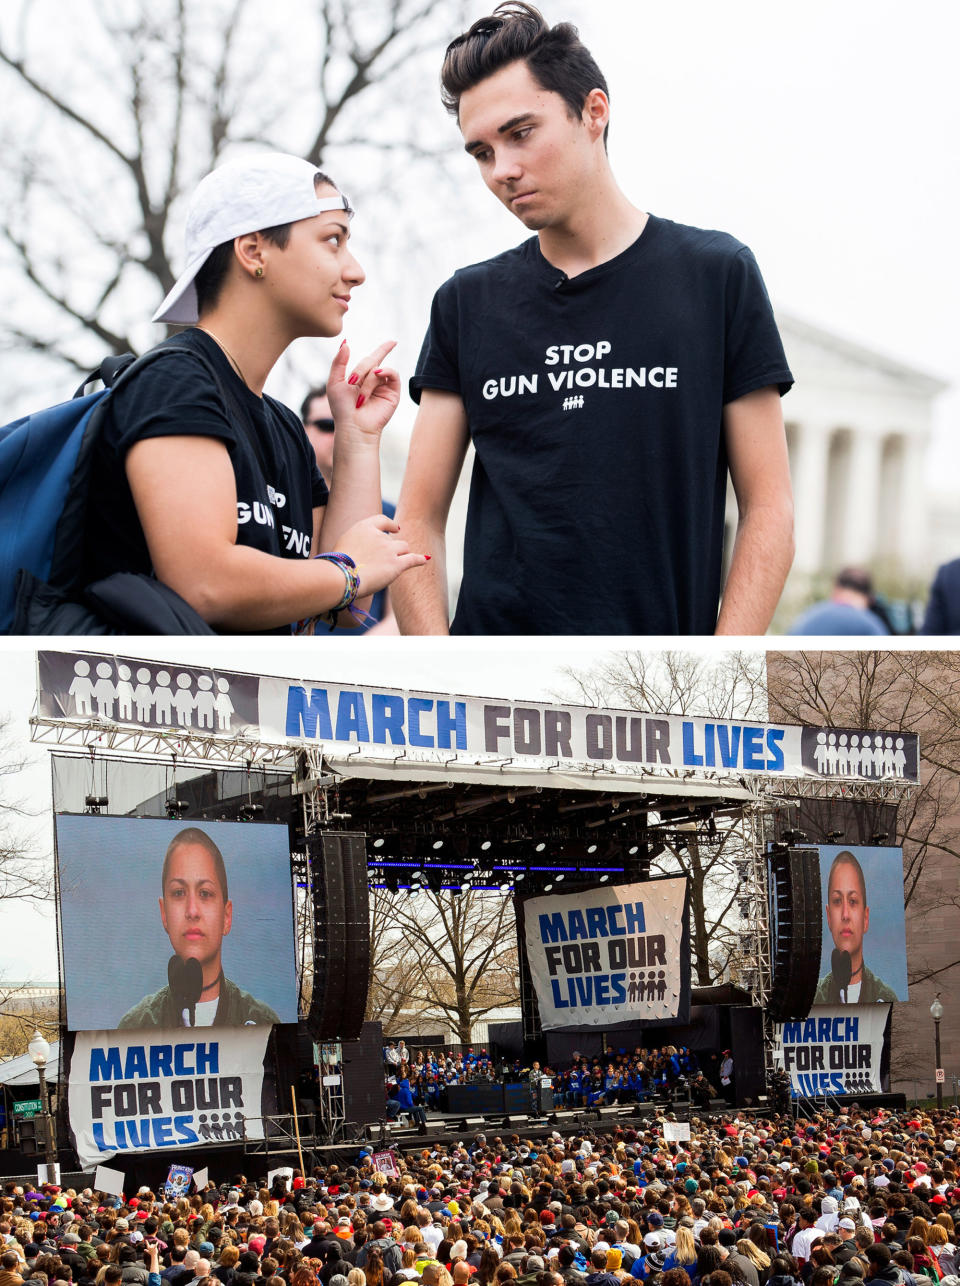 UNITED STATES - MARCH 25: David Hogg and Emma Gonzalez, survivors of the Marjory Stoneman Douglas High School shooting in Parkland, Fla., assemble on the East Front of the Capitol during a rally to organize letters to be delivered to congressional offices calling for an expansion of background checks on gun purchases on Monday, March 25, 2019. The Letters for Change event was held in commemoration of the one year anniversary of the March For Our Lives DC. 

FILE - In this March 24, 2018, file photo, Cuban-American and Parkland activist Emma Gonzalez, a survivor of the mass shooting at Marjory Stoneman Douglas High School in Parkland, Fla., addresses the 